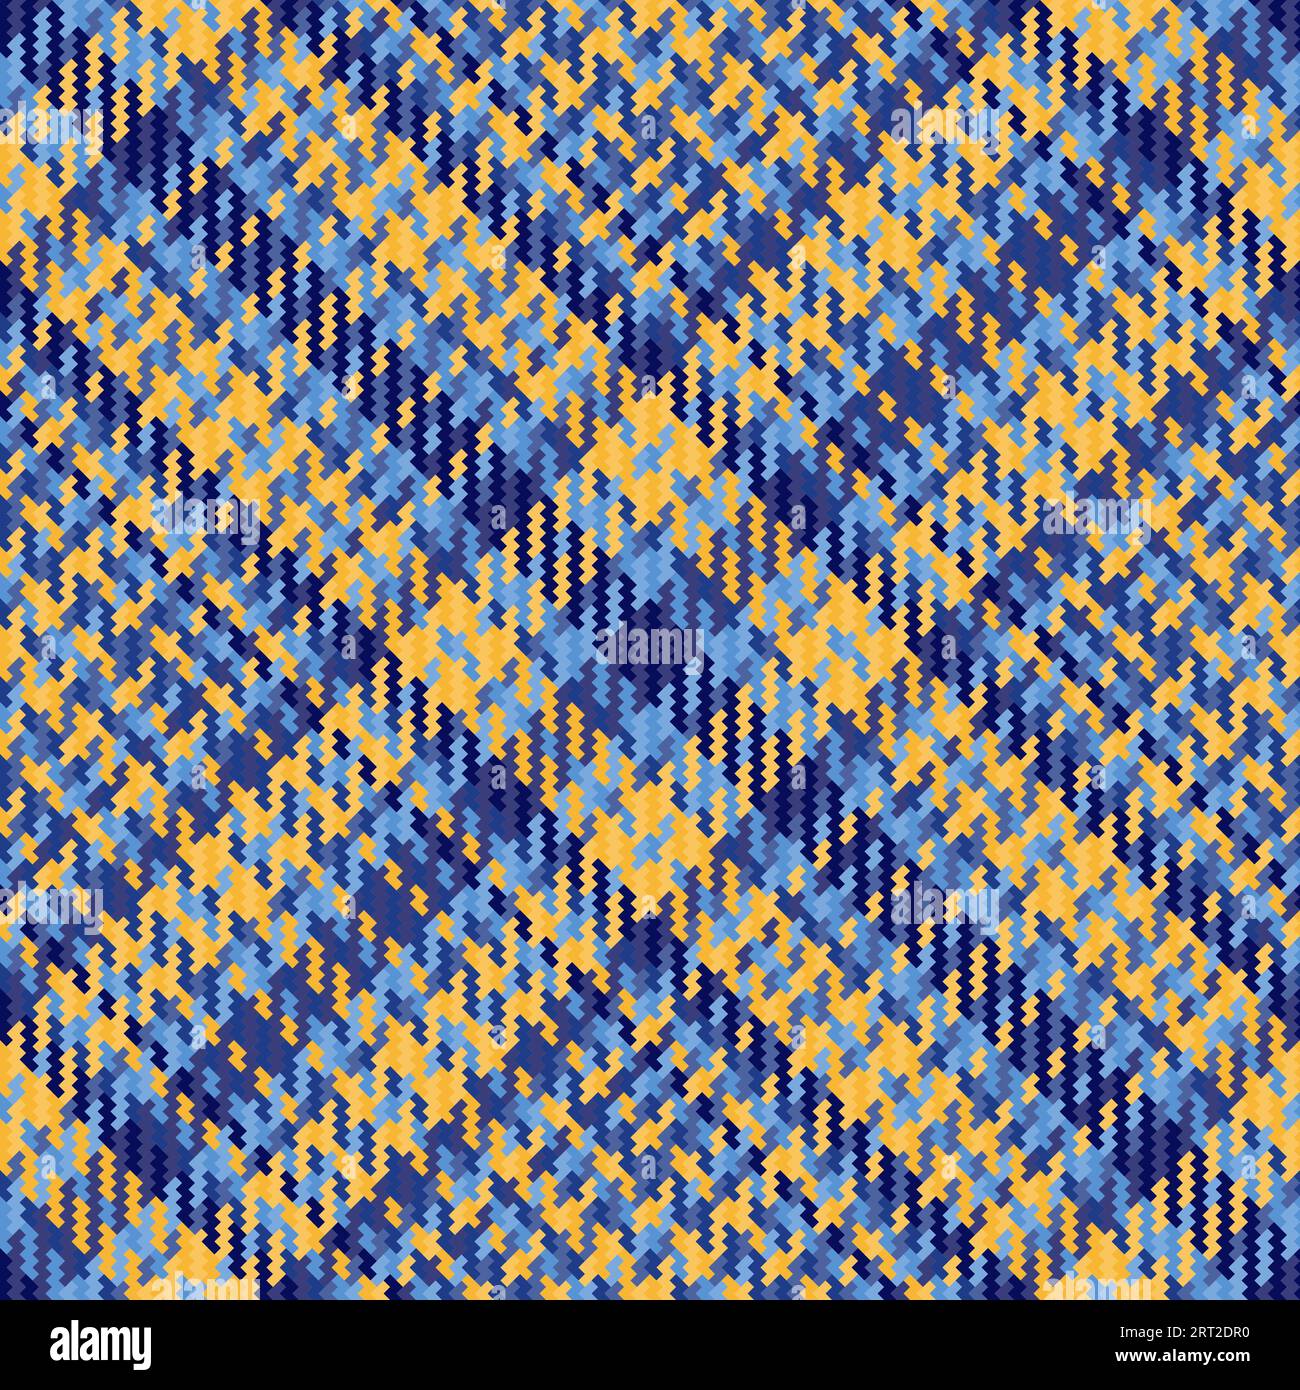 Background fabric vector of seamless check texture with a textile tartan pattern plaid in blue and amber colors. Stock Vector